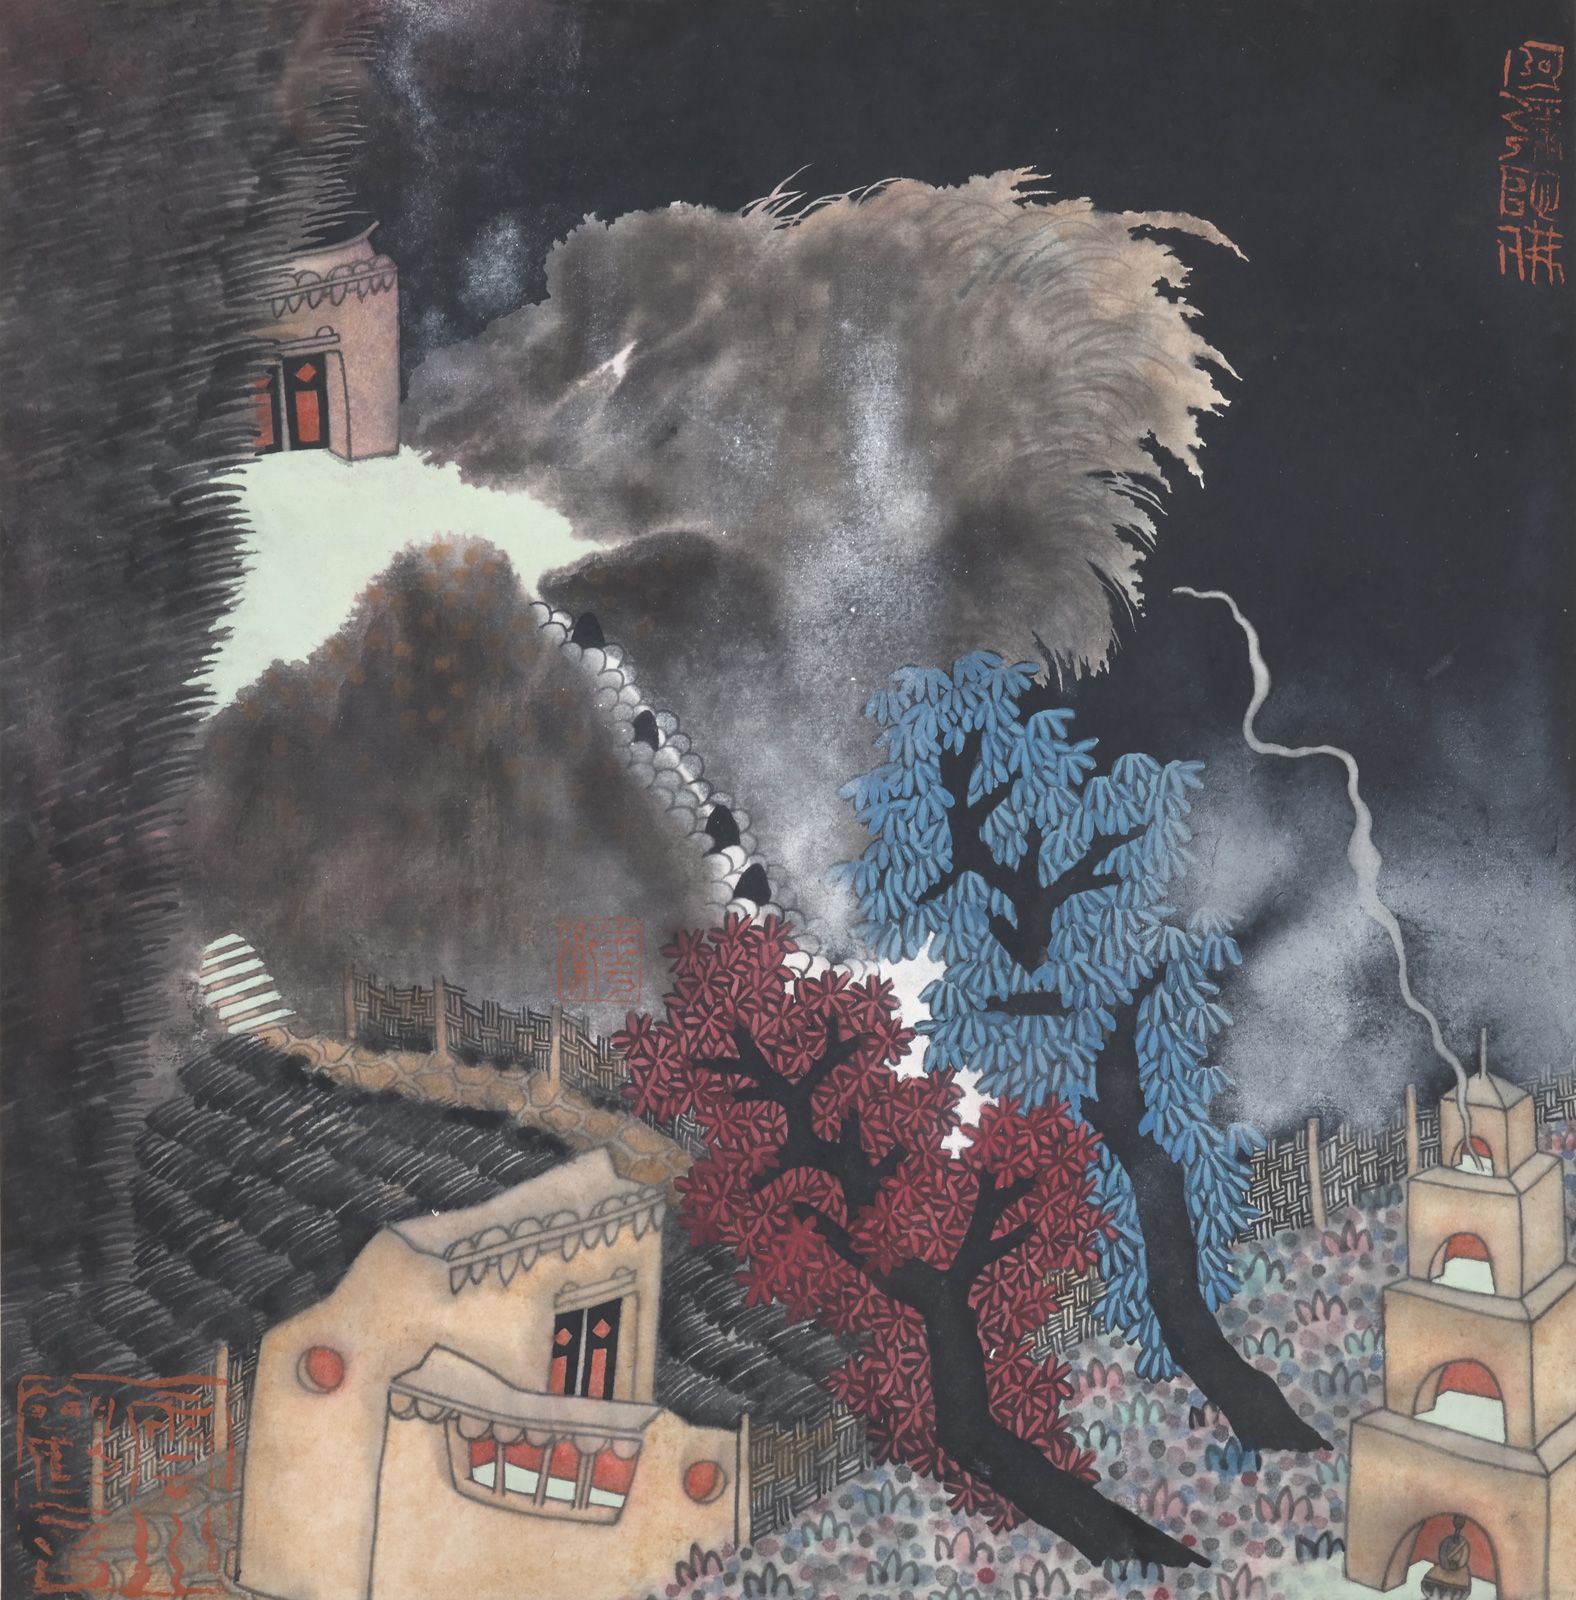 GUO Huawei (1983) The two sacred trees, 2012 
Ink and acrylic on rice paper, art&hellip;